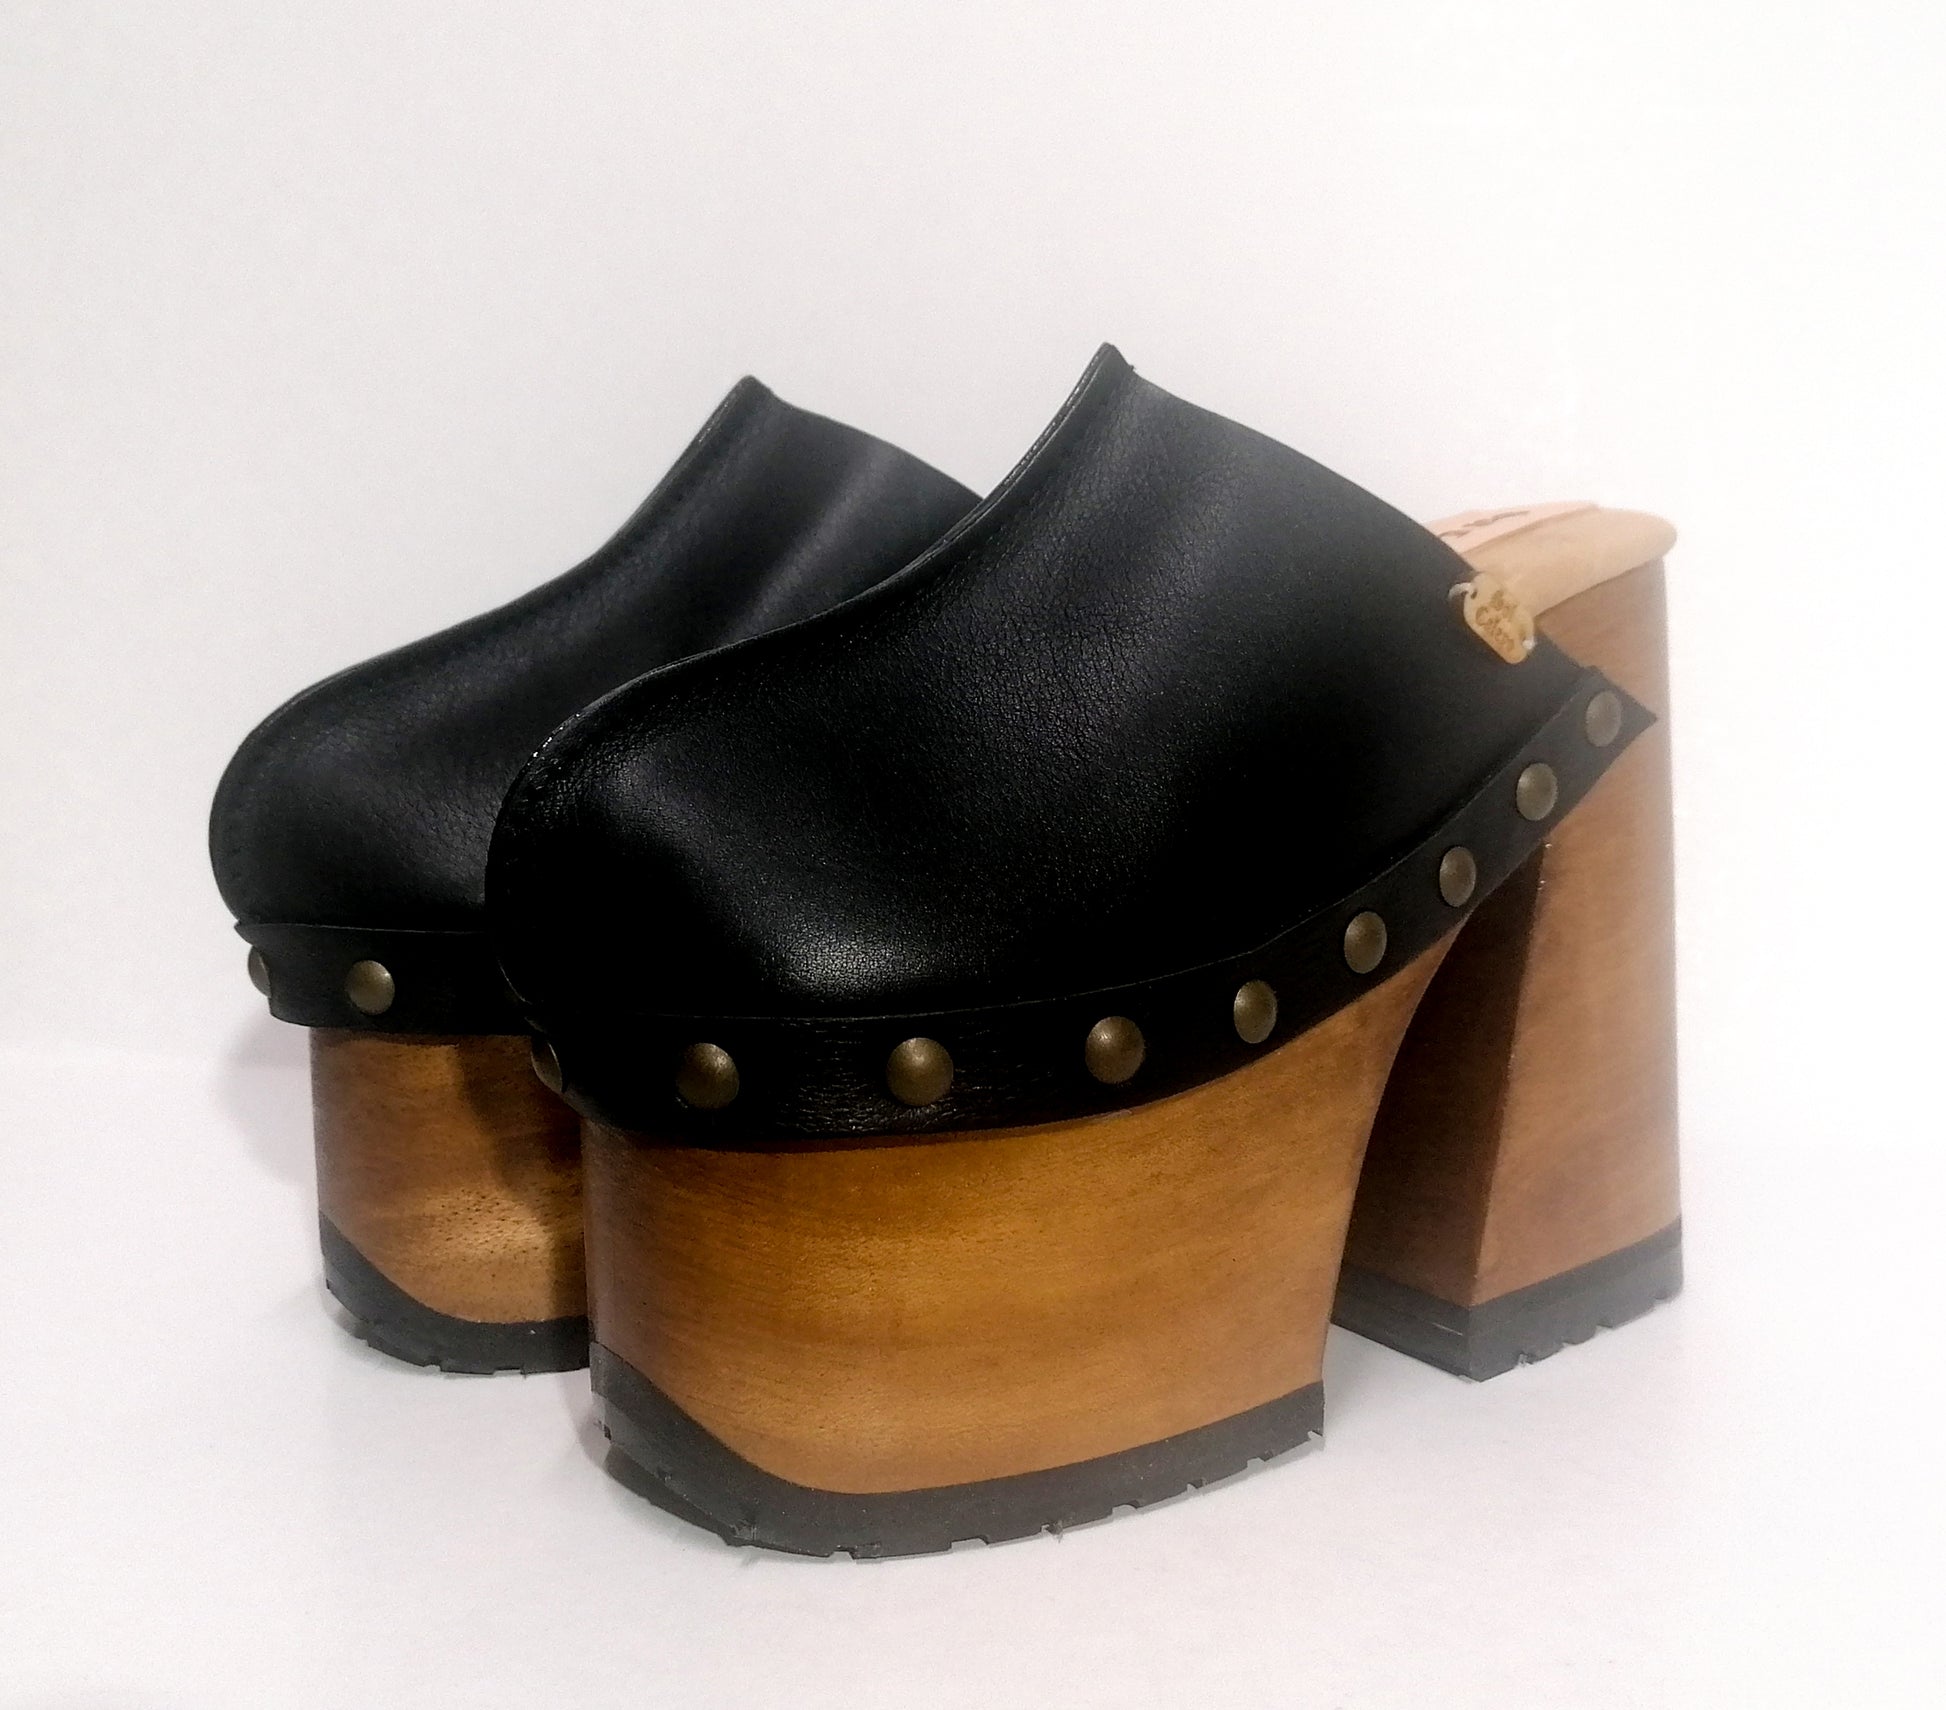 Black leather clog vintage style 70s. Leather clog with super high wooden heel. Vintage style wooden clog. Sizes 34 to 47. High quality handmade leather shoes by sol Caleyo. Sustainable fashion.